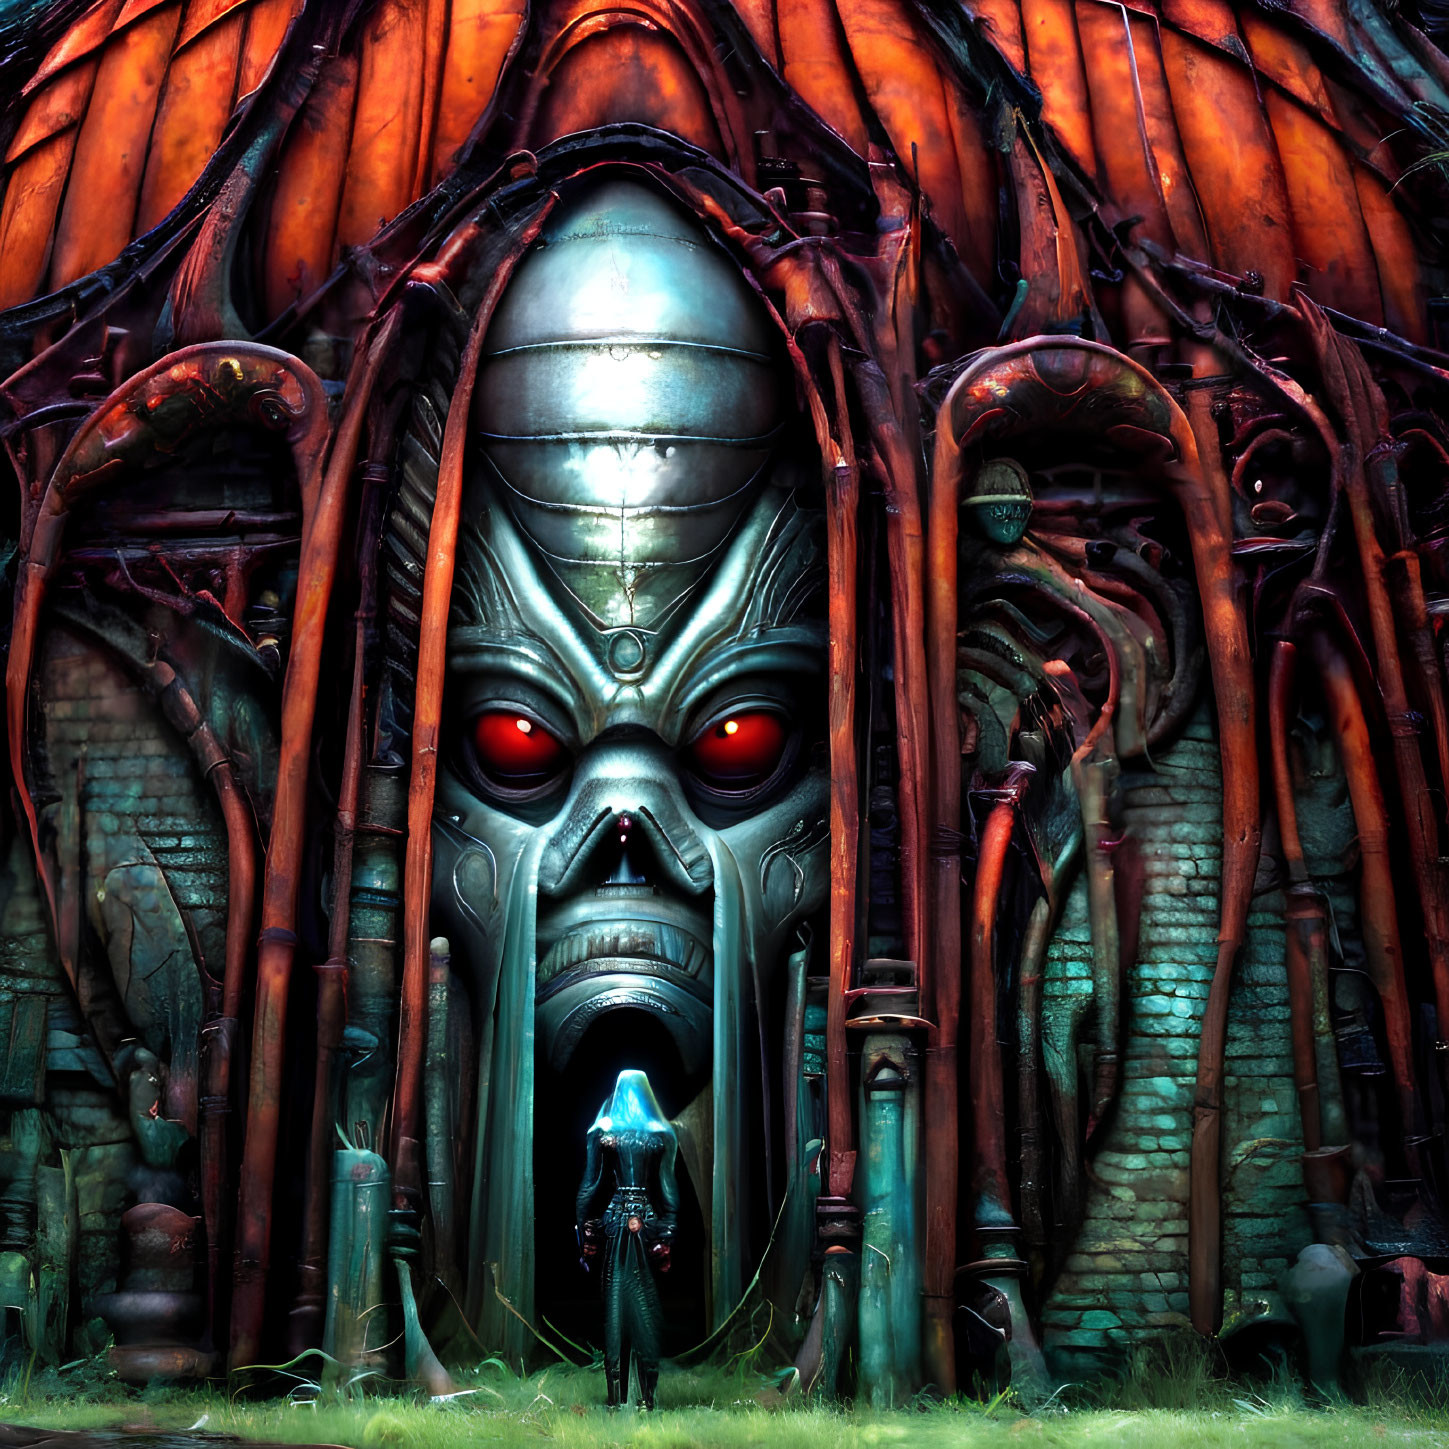 Mysterious alien structure with glowing red eyes and biomechanical design